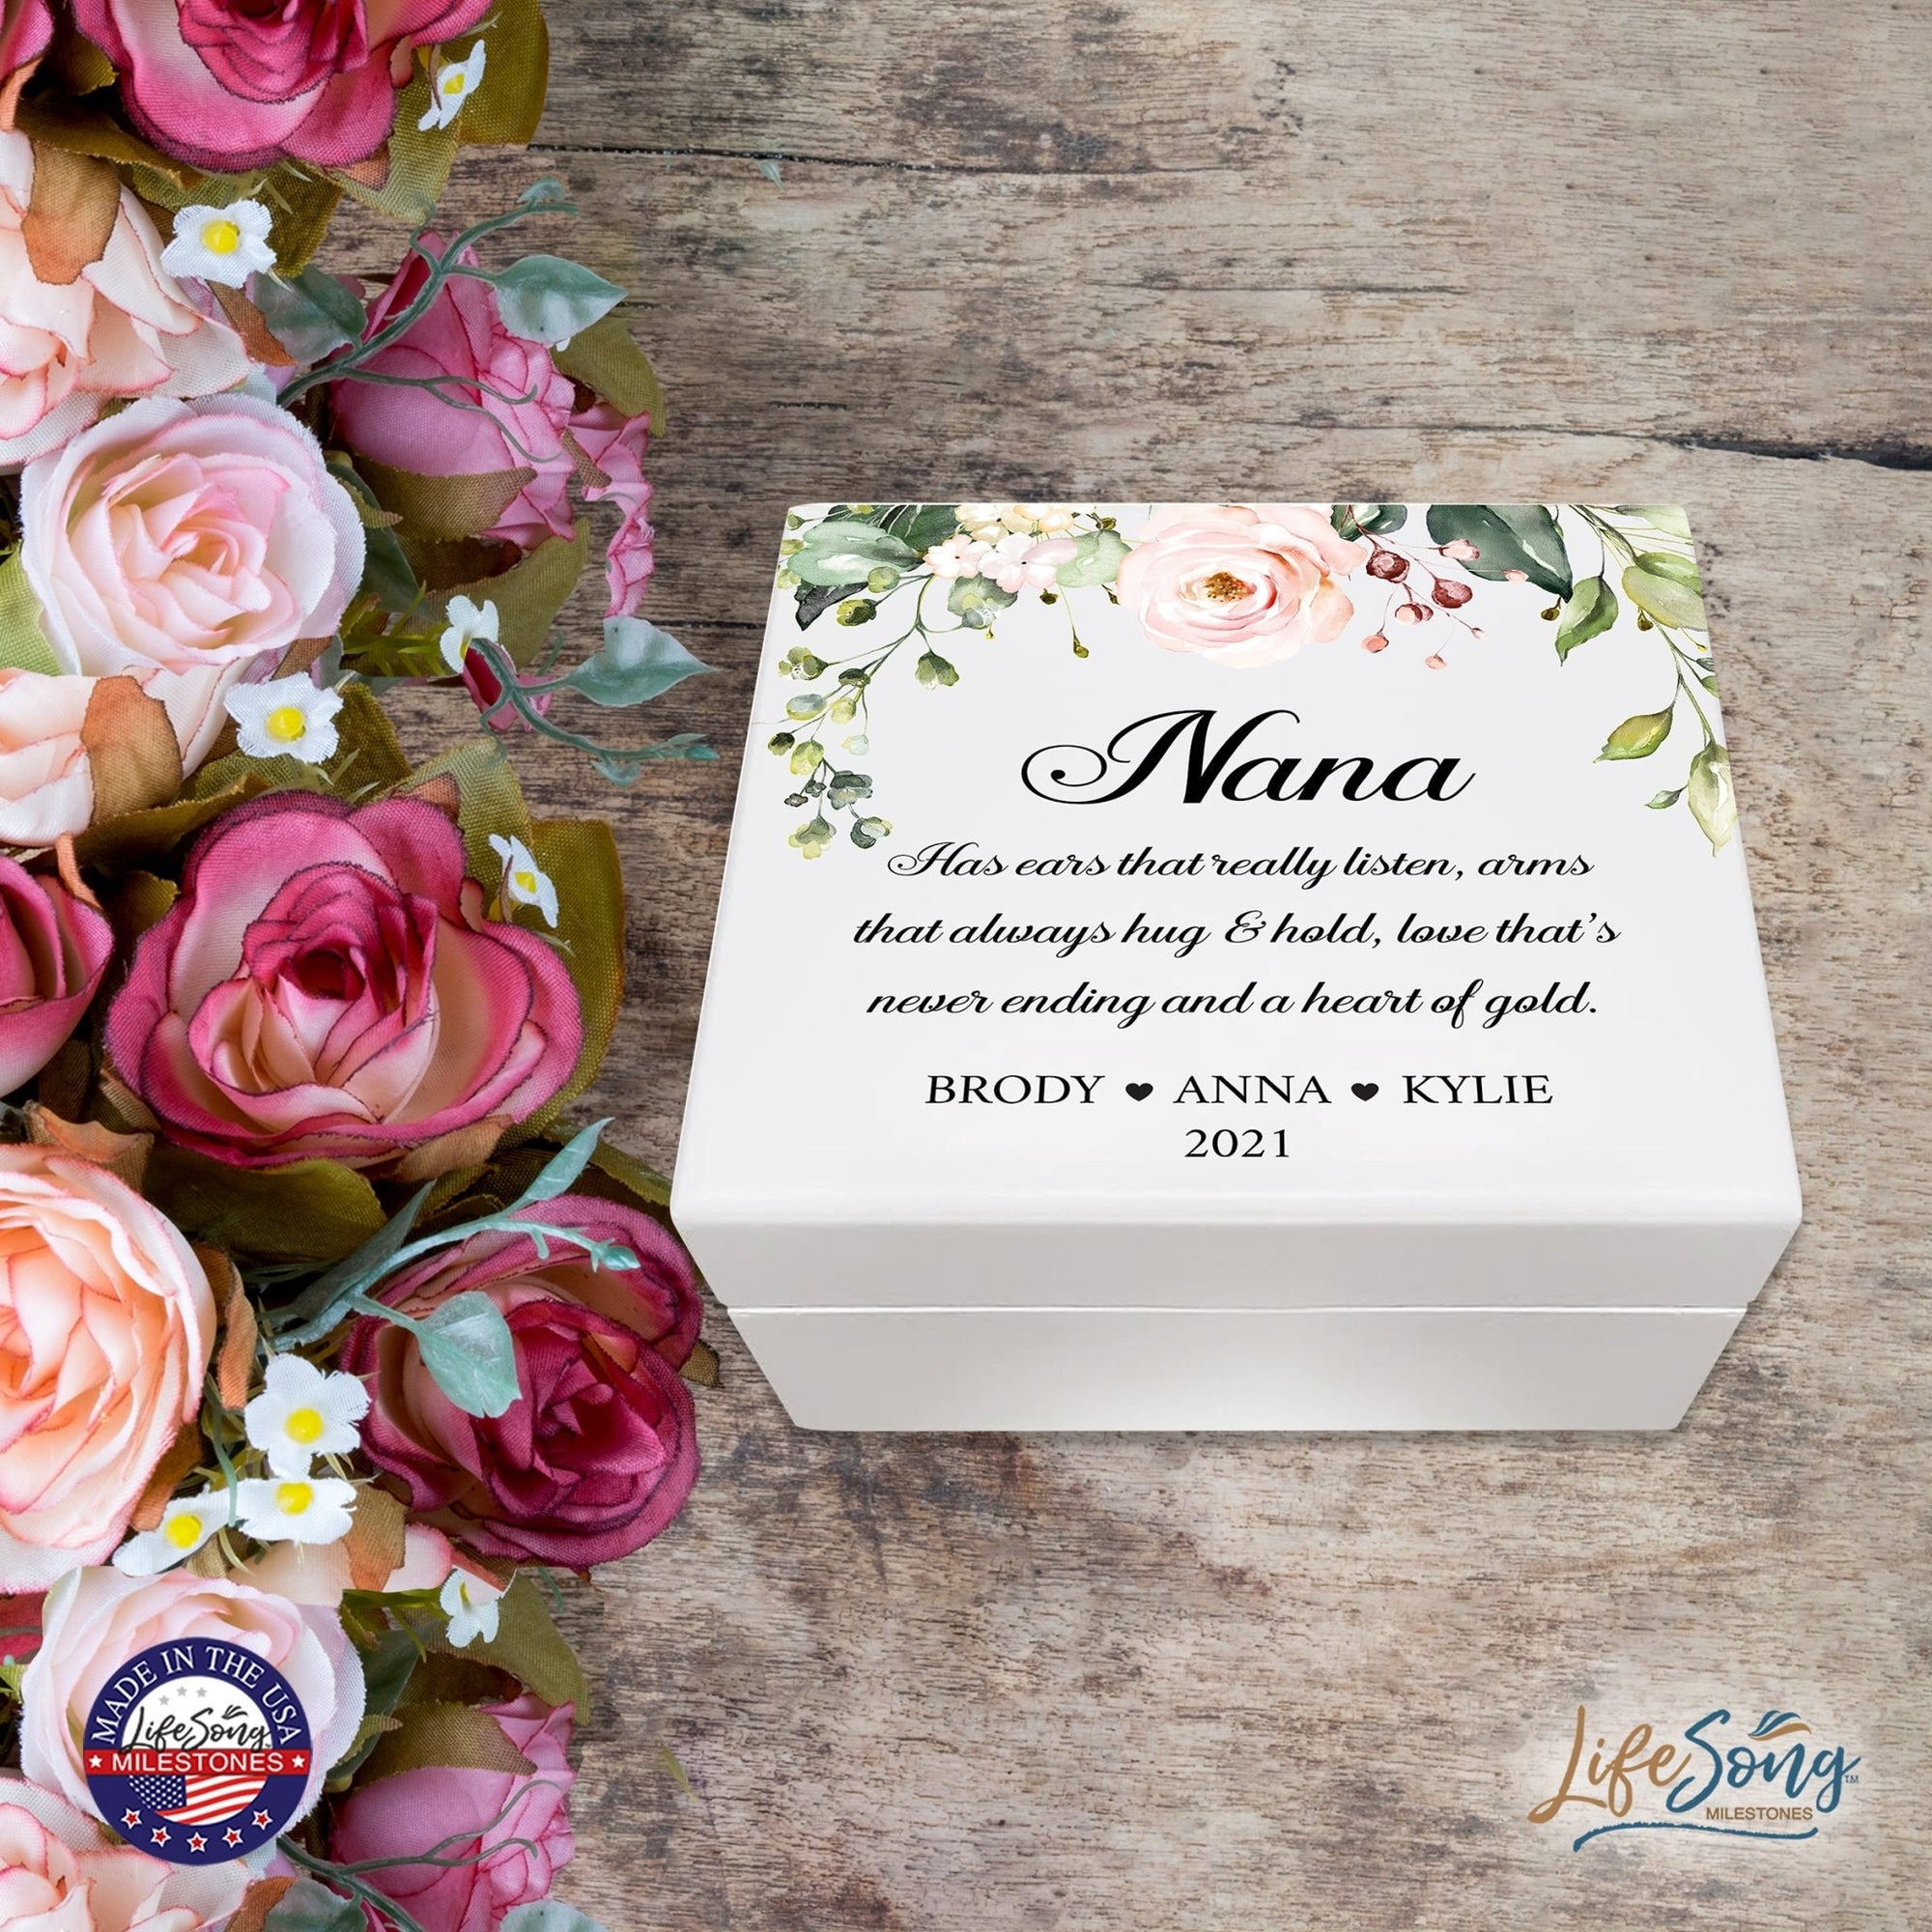 Personalized Nana’s White Keepsake Box 6x5.5 with Inspirational verse - A Heart Of Gold - LifeSong Milestones